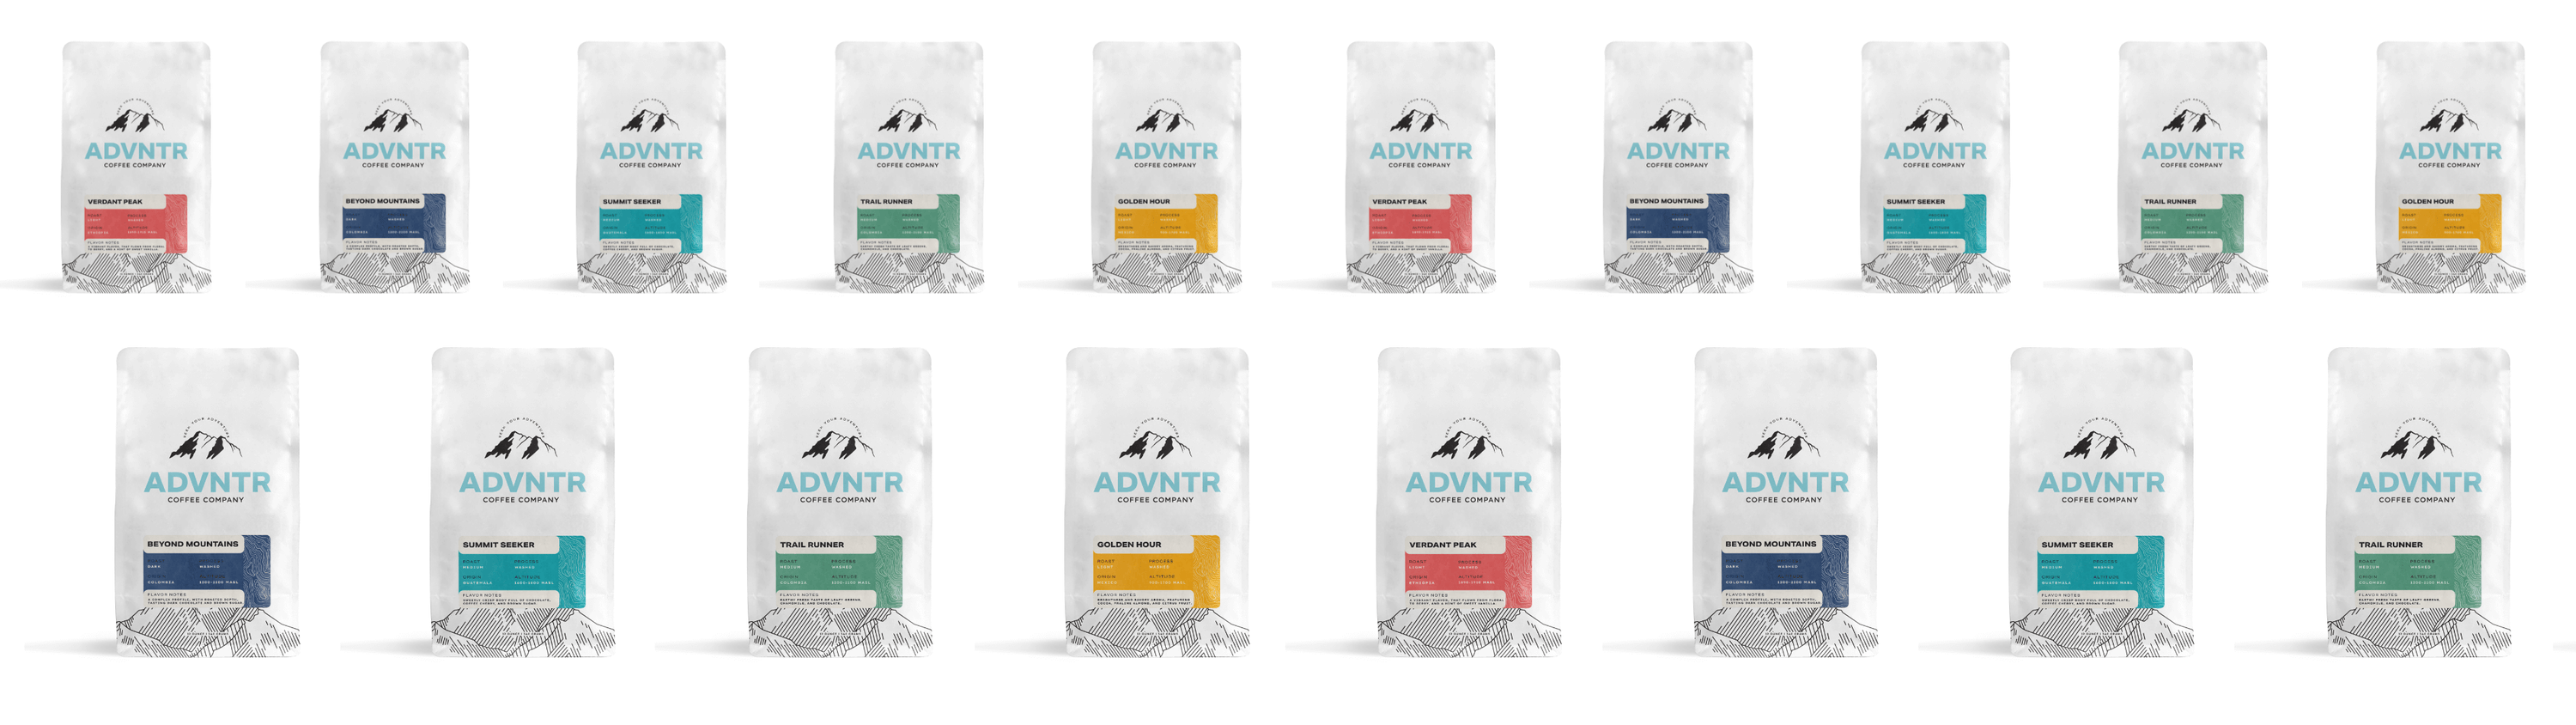 12 ounce coffee bags from ADVNTR Coffee Company